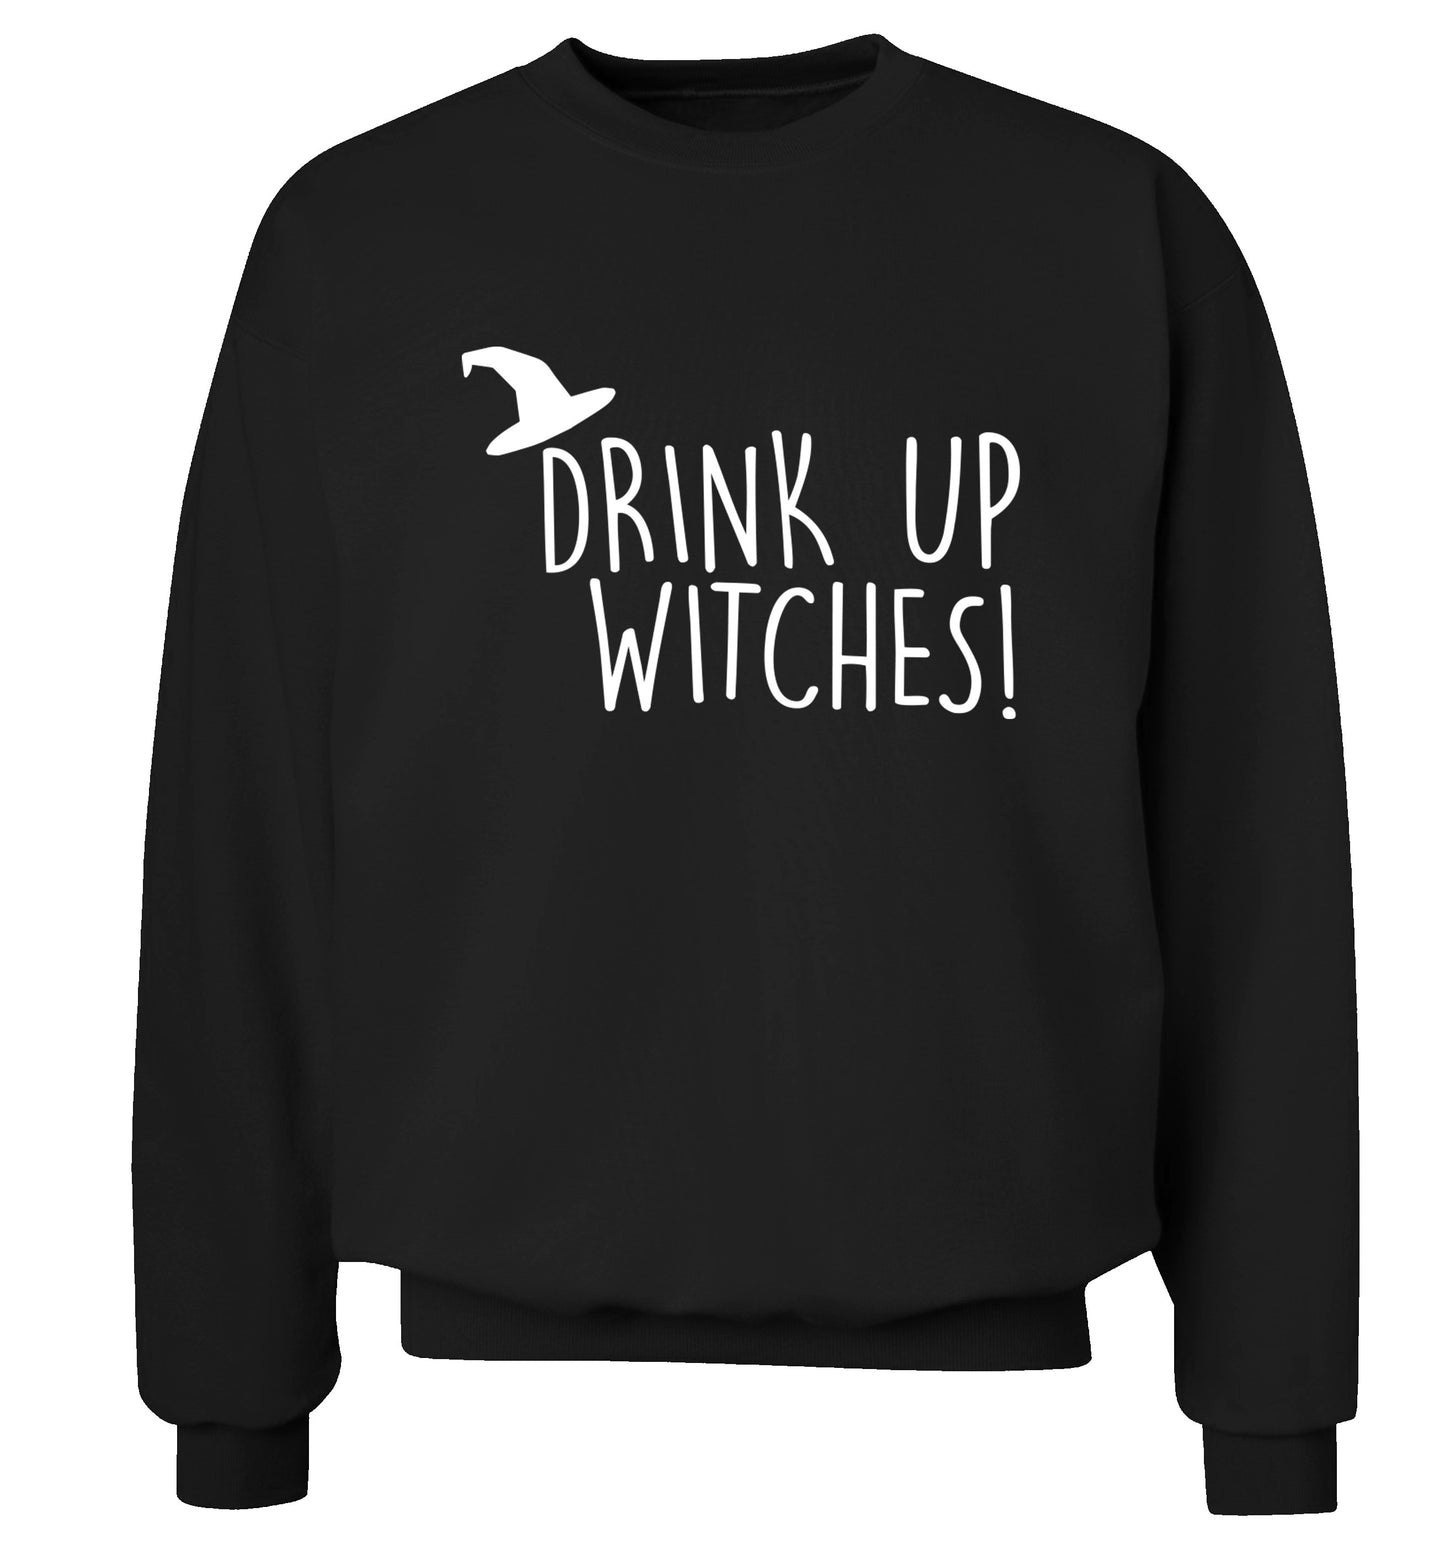 Drink up witches Adult's unisex black Sweater 2XL